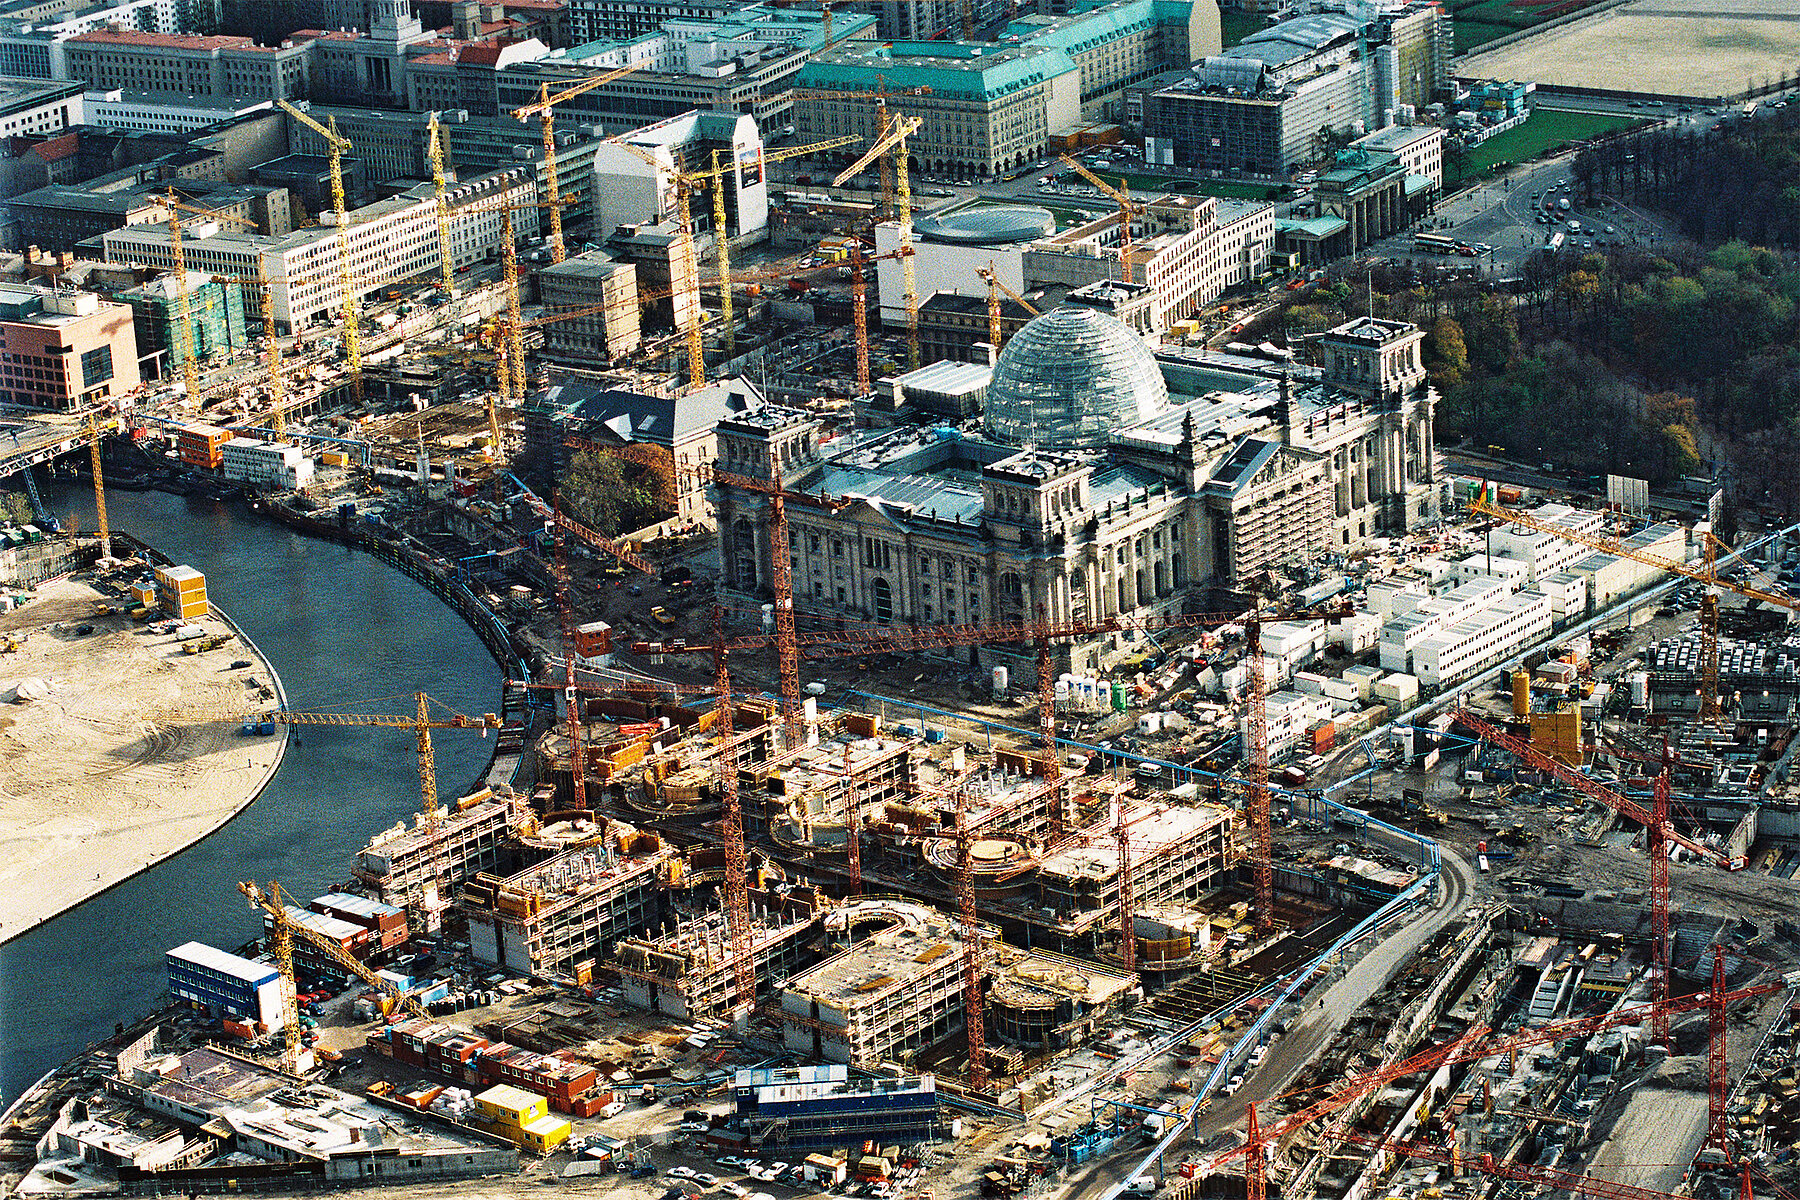 An aerial perspective of the construction site surrounding the Reichstag building. On the left is the Spree.